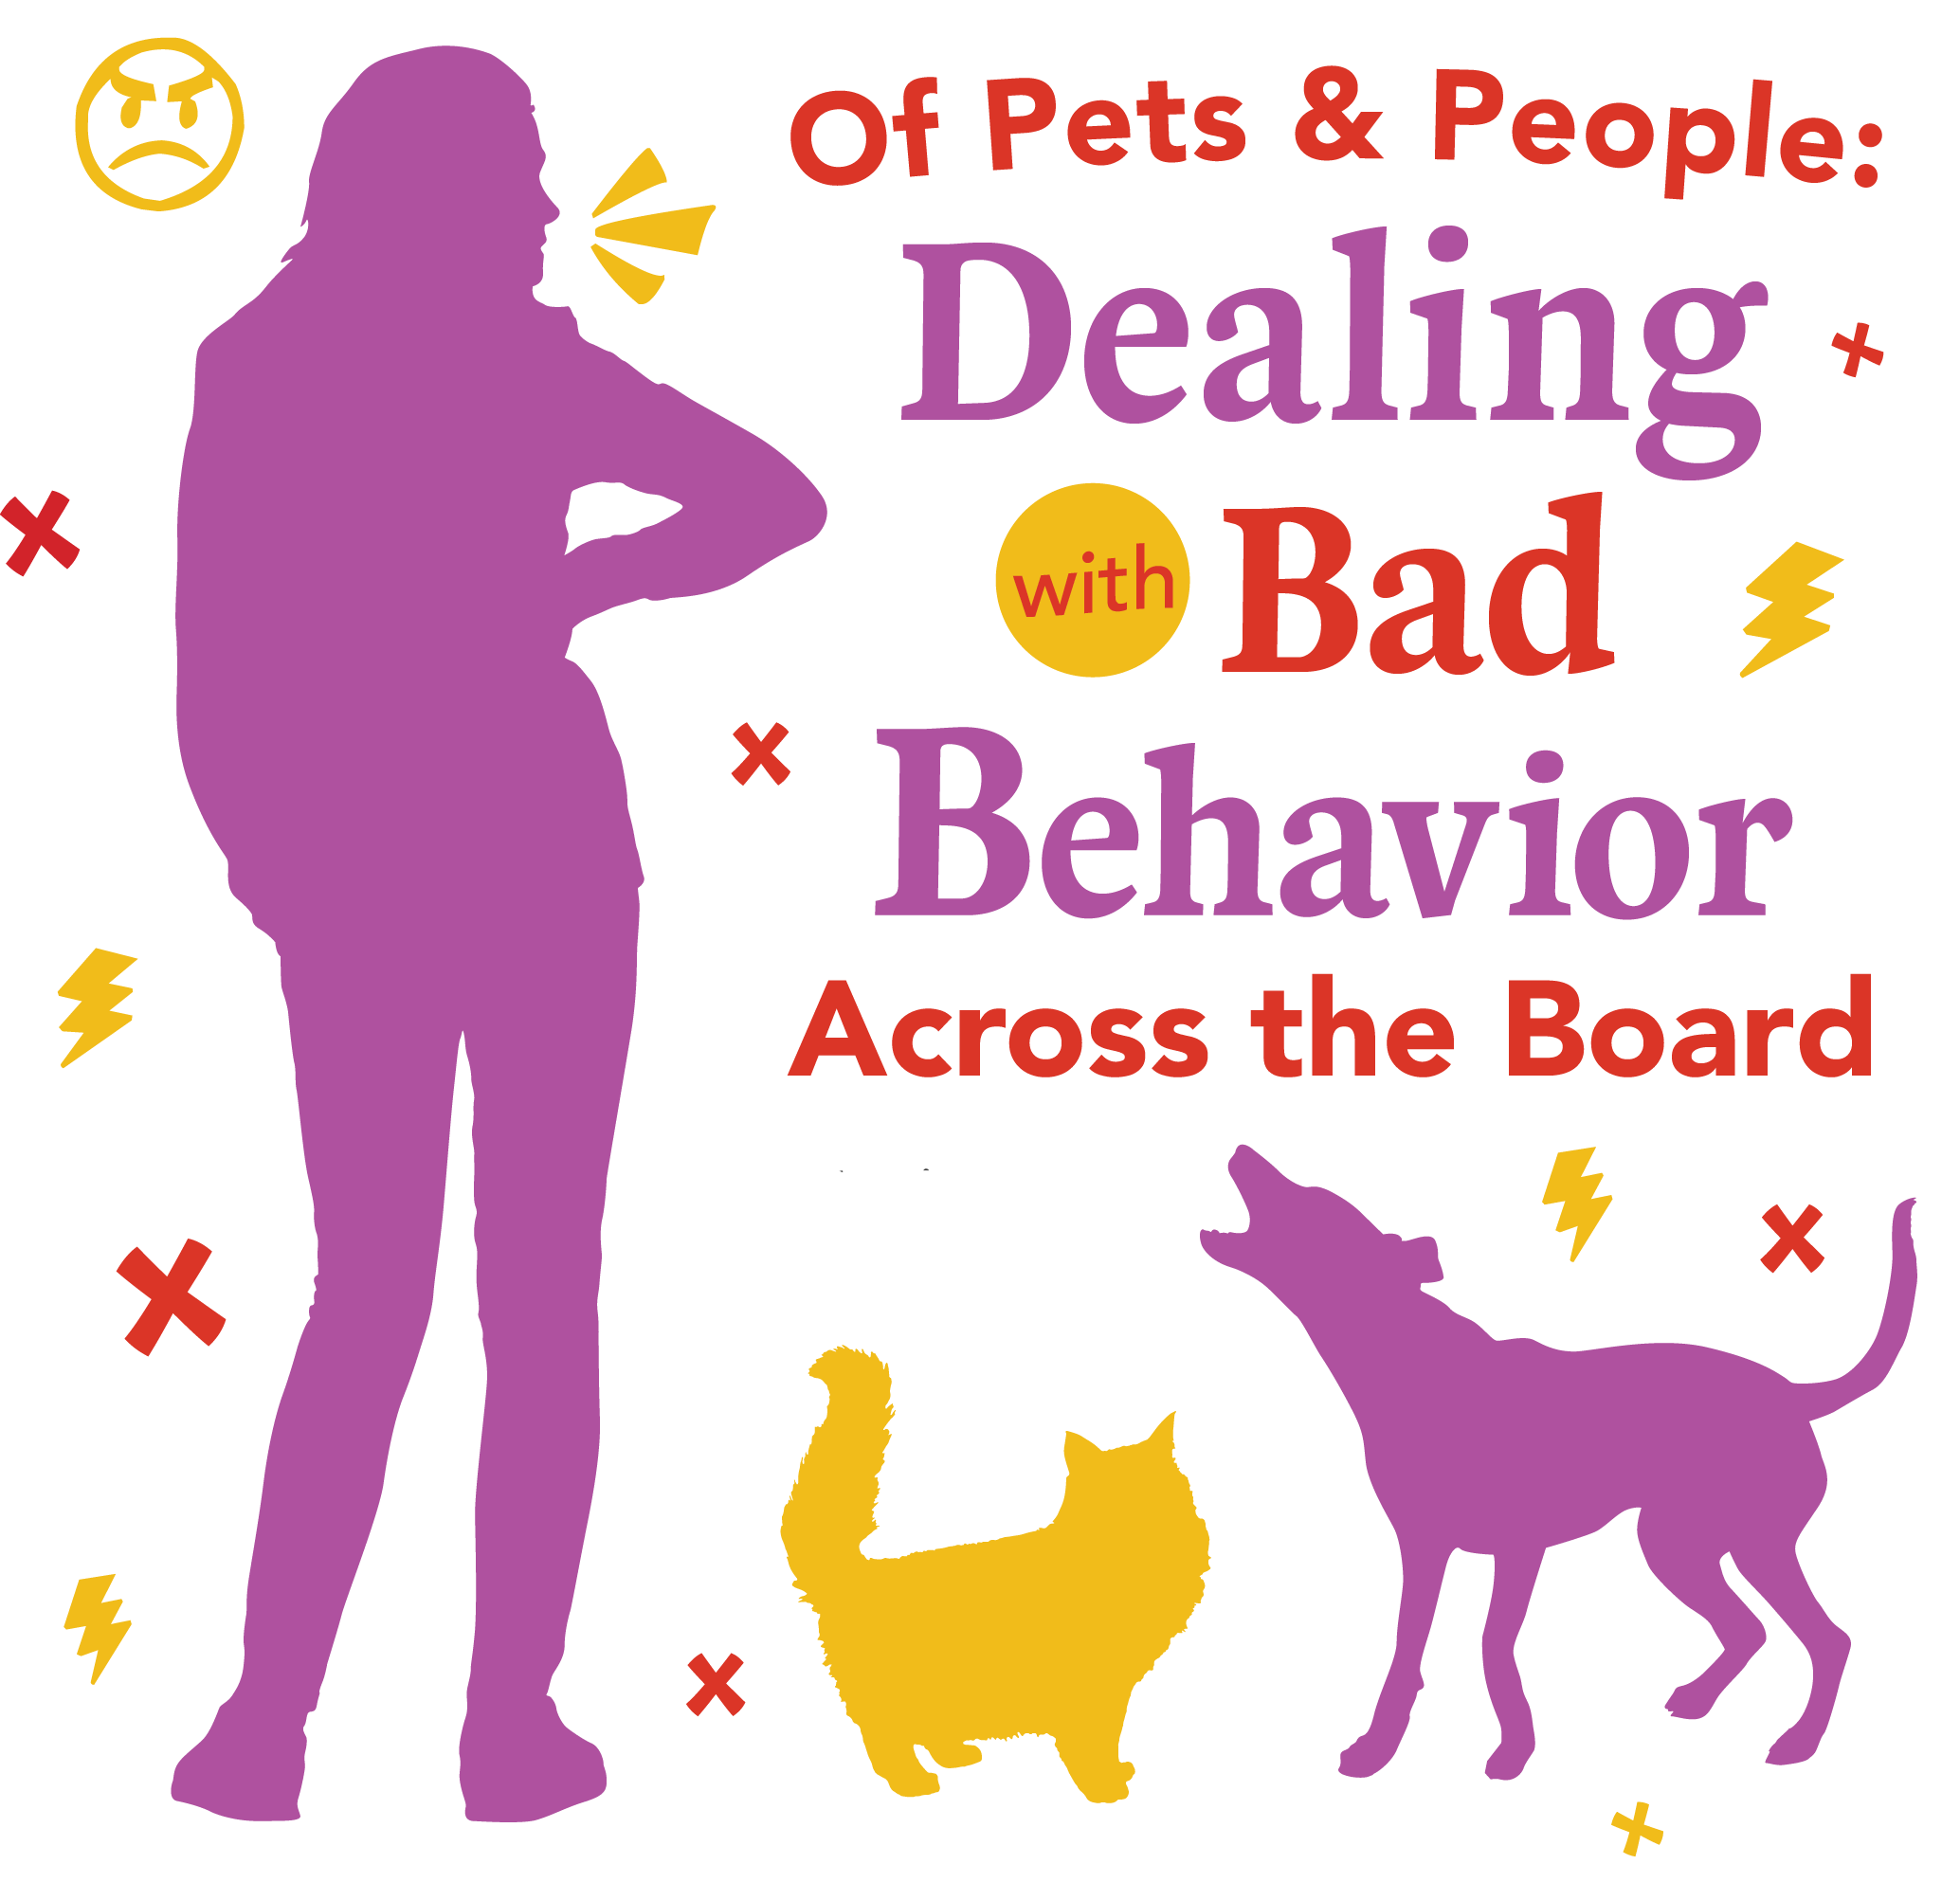 Of Pets and People: Dealing with Bad Behavior Across the Board